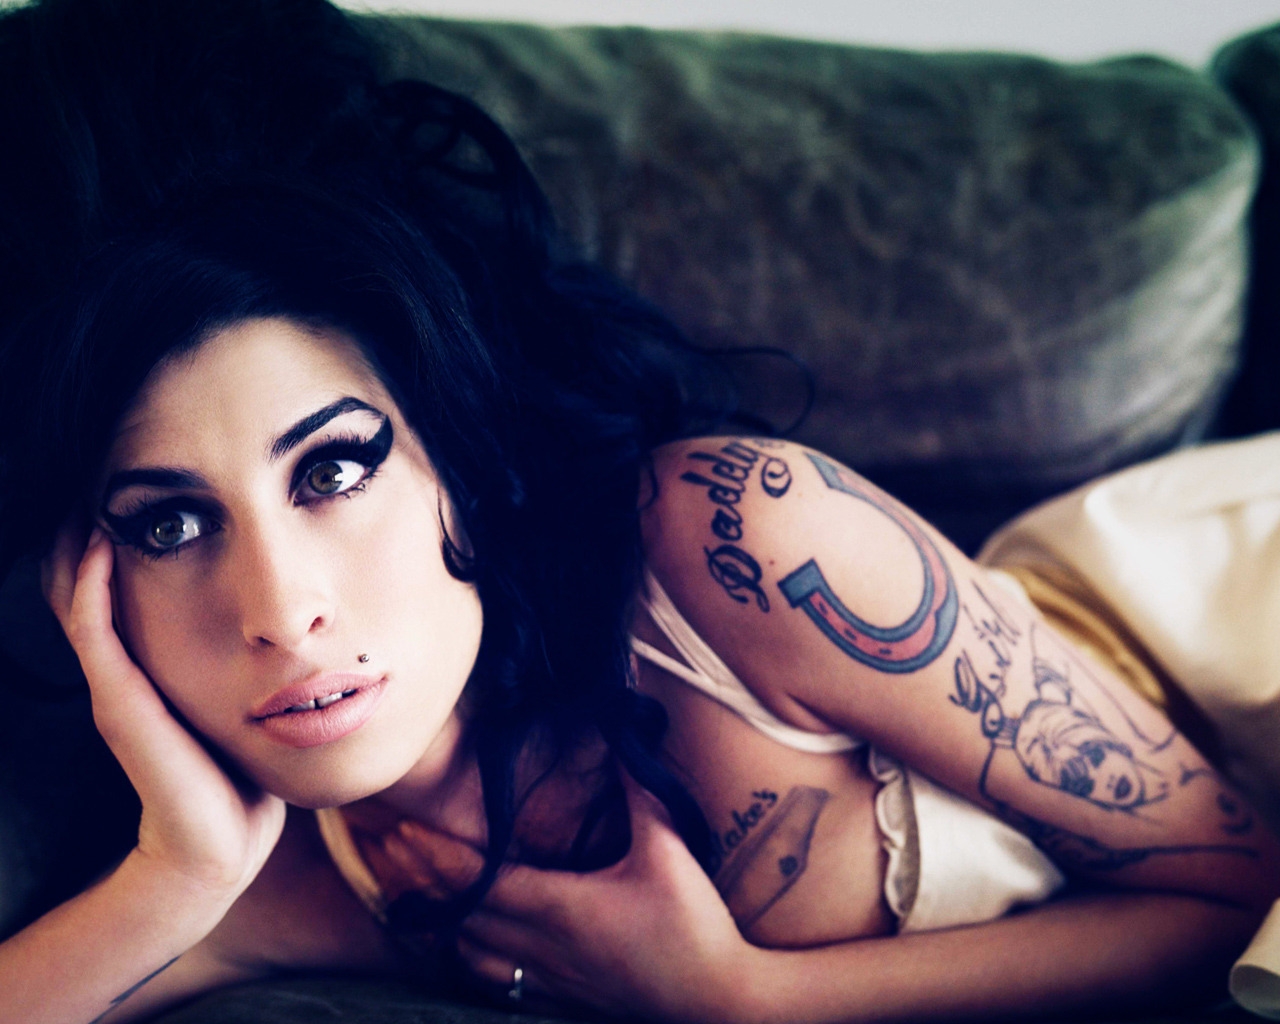 Amy Winehouse for 1280 x 1024 resolution